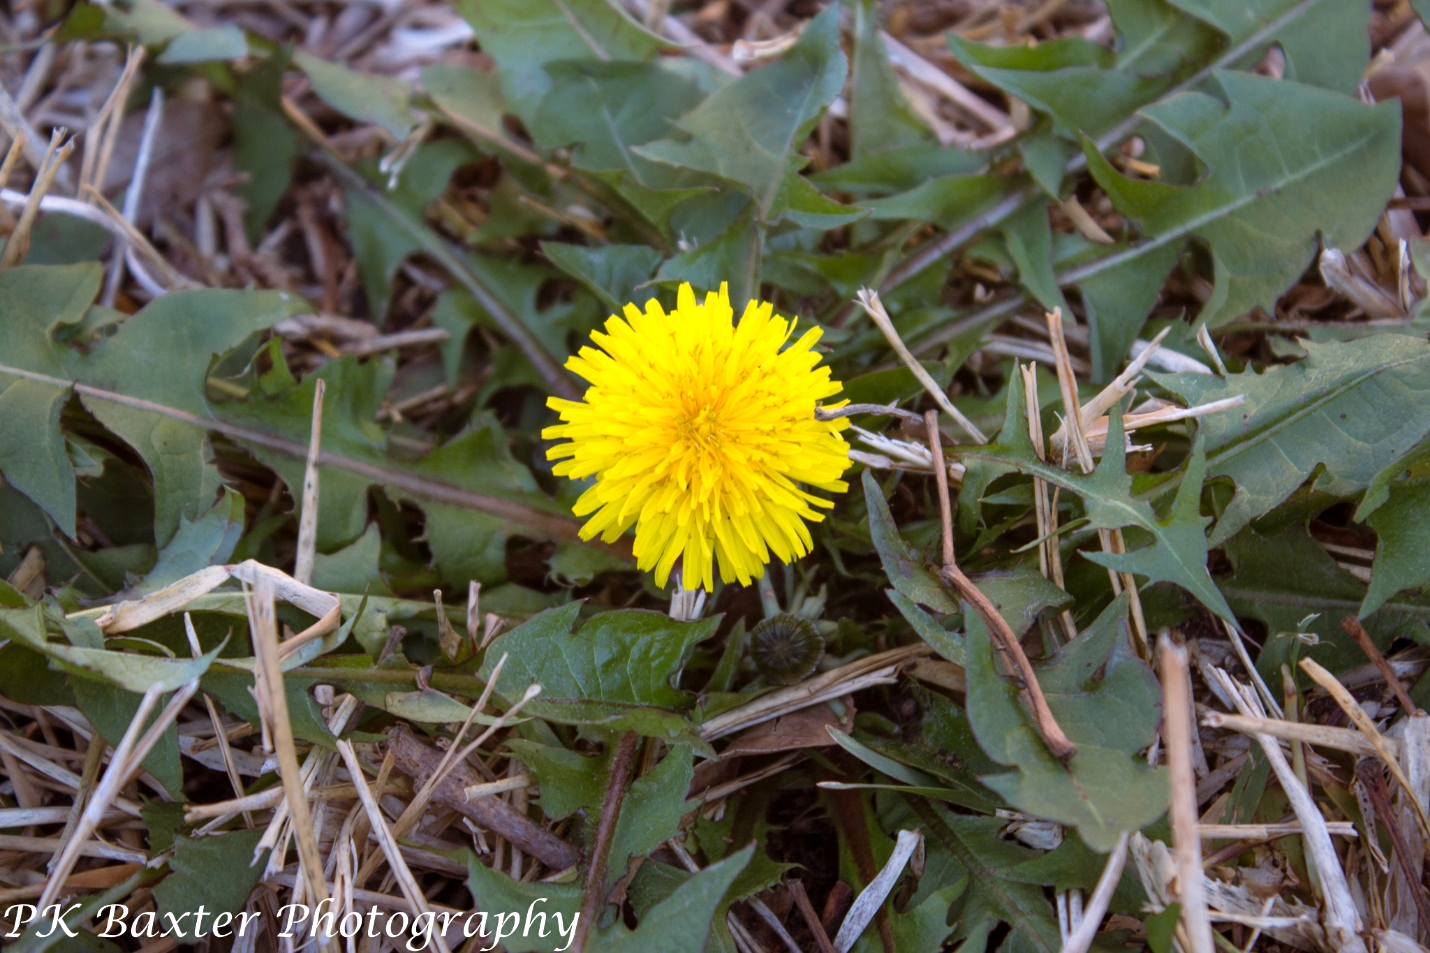 A yellow flower in the grass

Description automatically generated with medium confidence